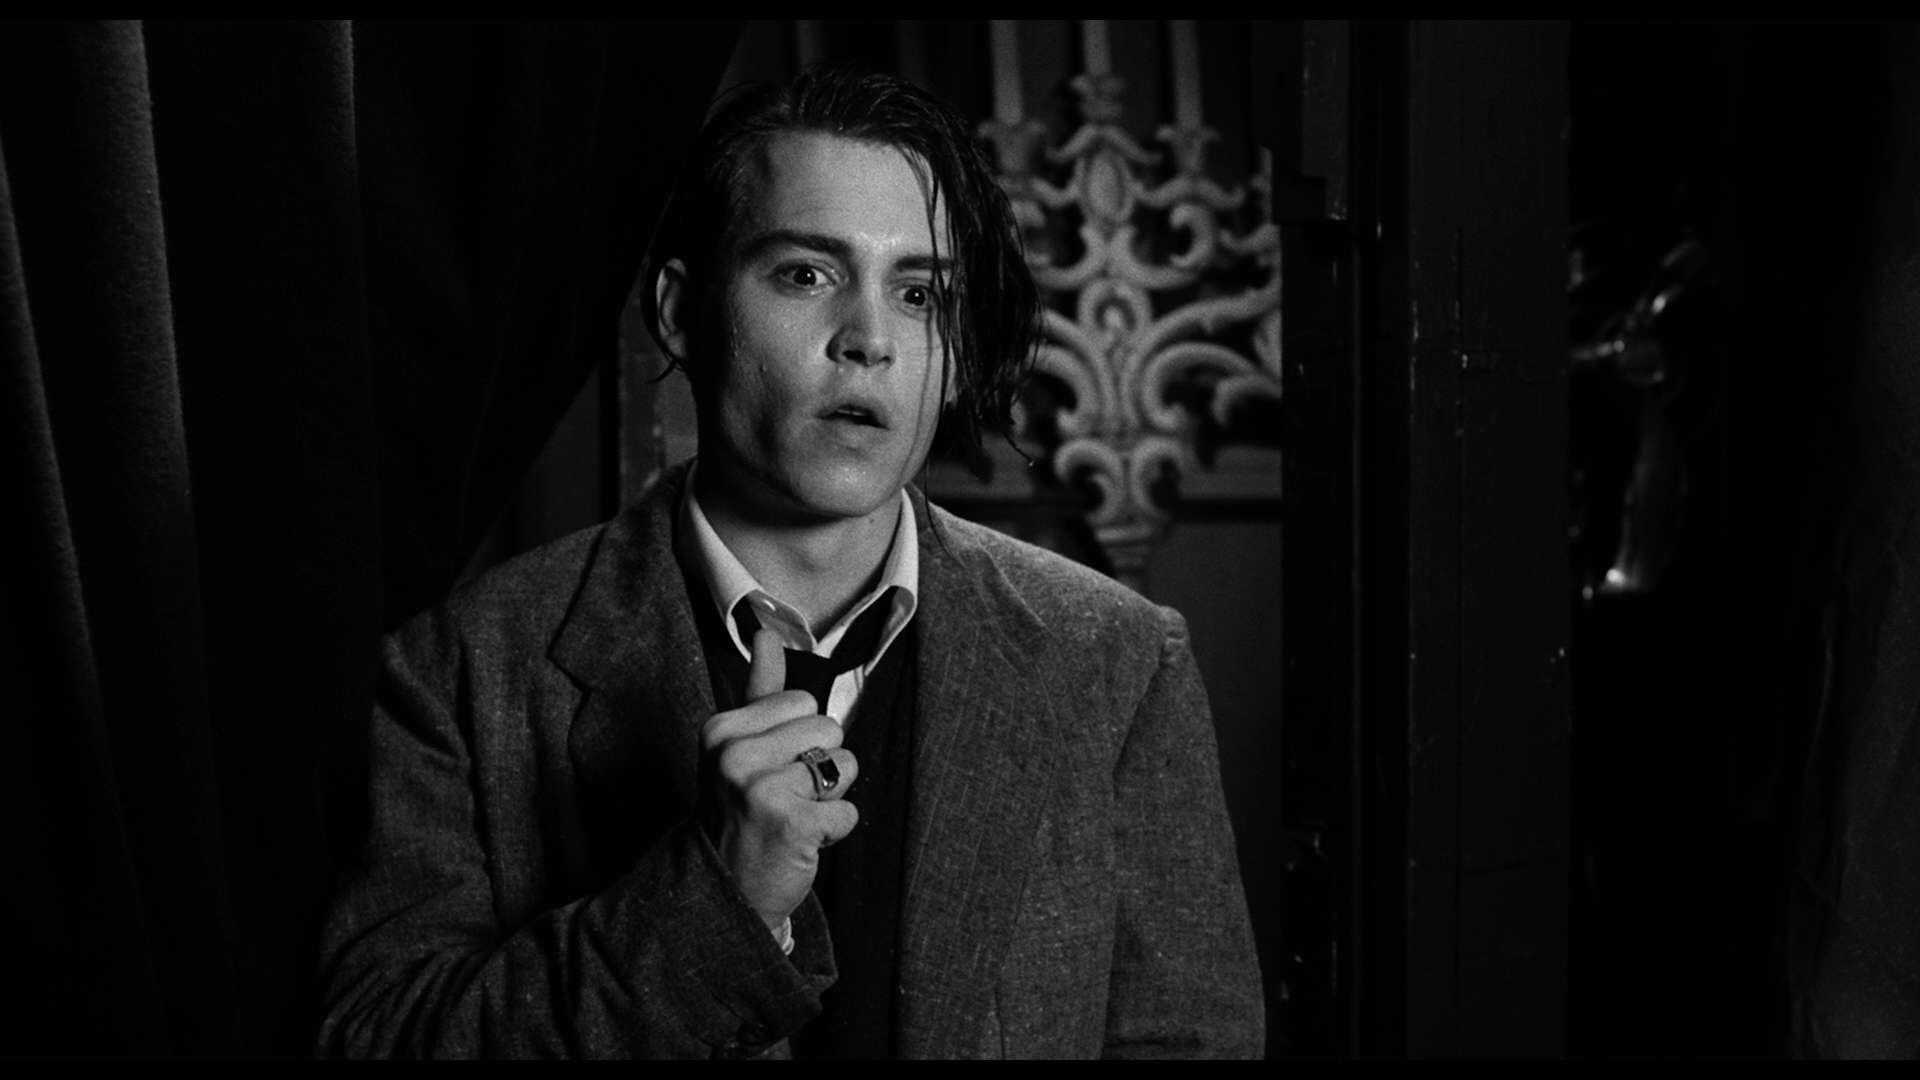 Ed Wood (1994). Cult or great movie #34 that unfairly failed at the box office - My, Actors and actresses, I advise you to look, What to see, Hollywood, Classic, Comedy, Biography, Screen adaptation, Black and white, Filming, Screenshot, Drama, Johnny Depp, Bill Murray, Tim Burton, Ed Wood, The photo, Bela Lugosi, Nostalgia, Longpost, Movies